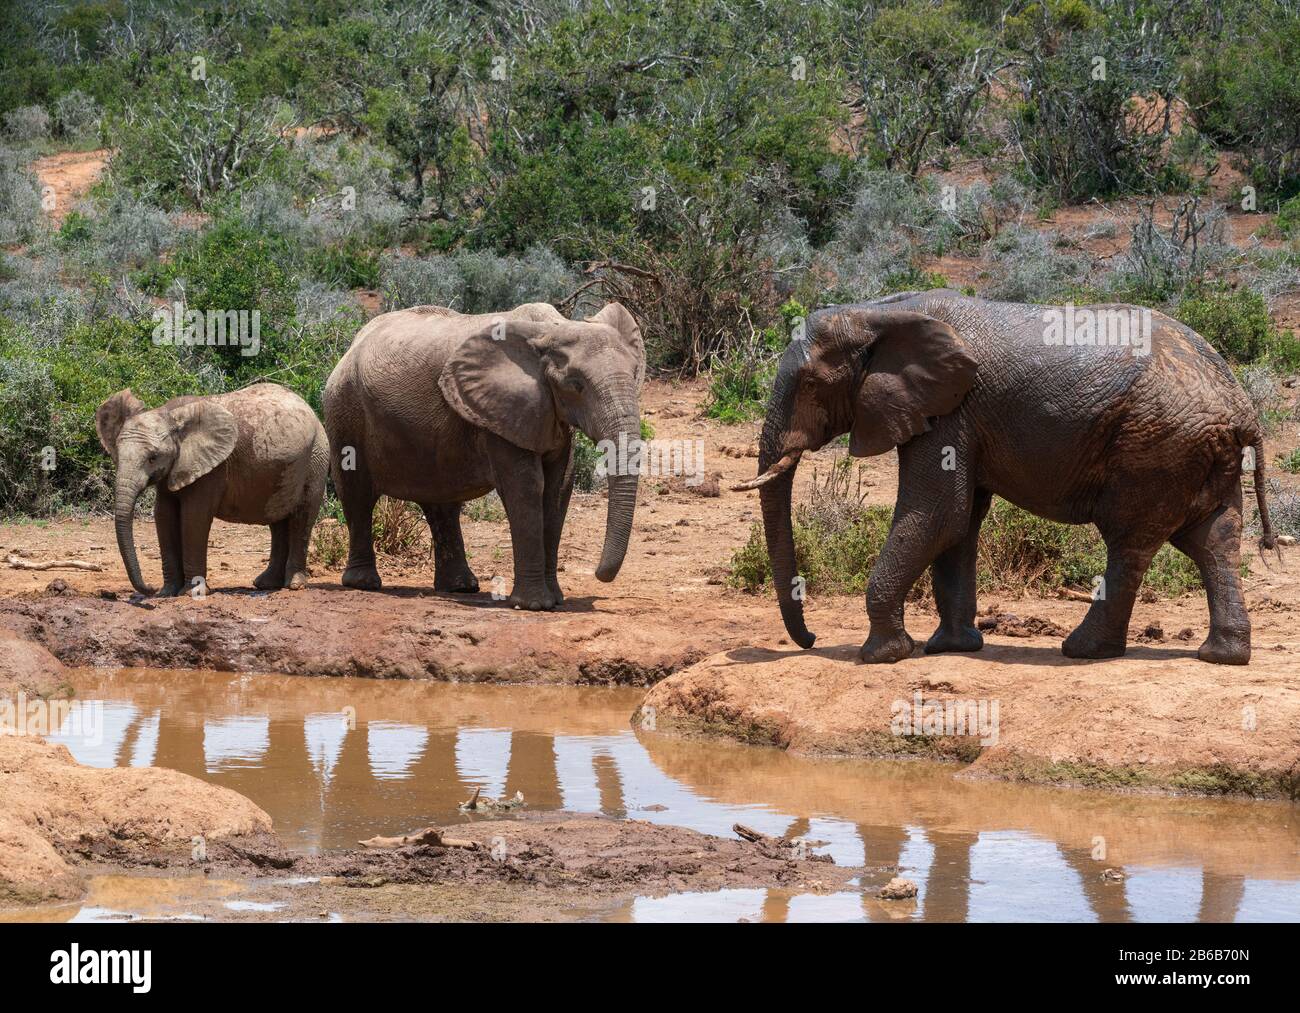 Elephants cooling off at a waterhole or water pan in the Addo Elephant National Park, Eastern Cape, South Africa Stock Photo